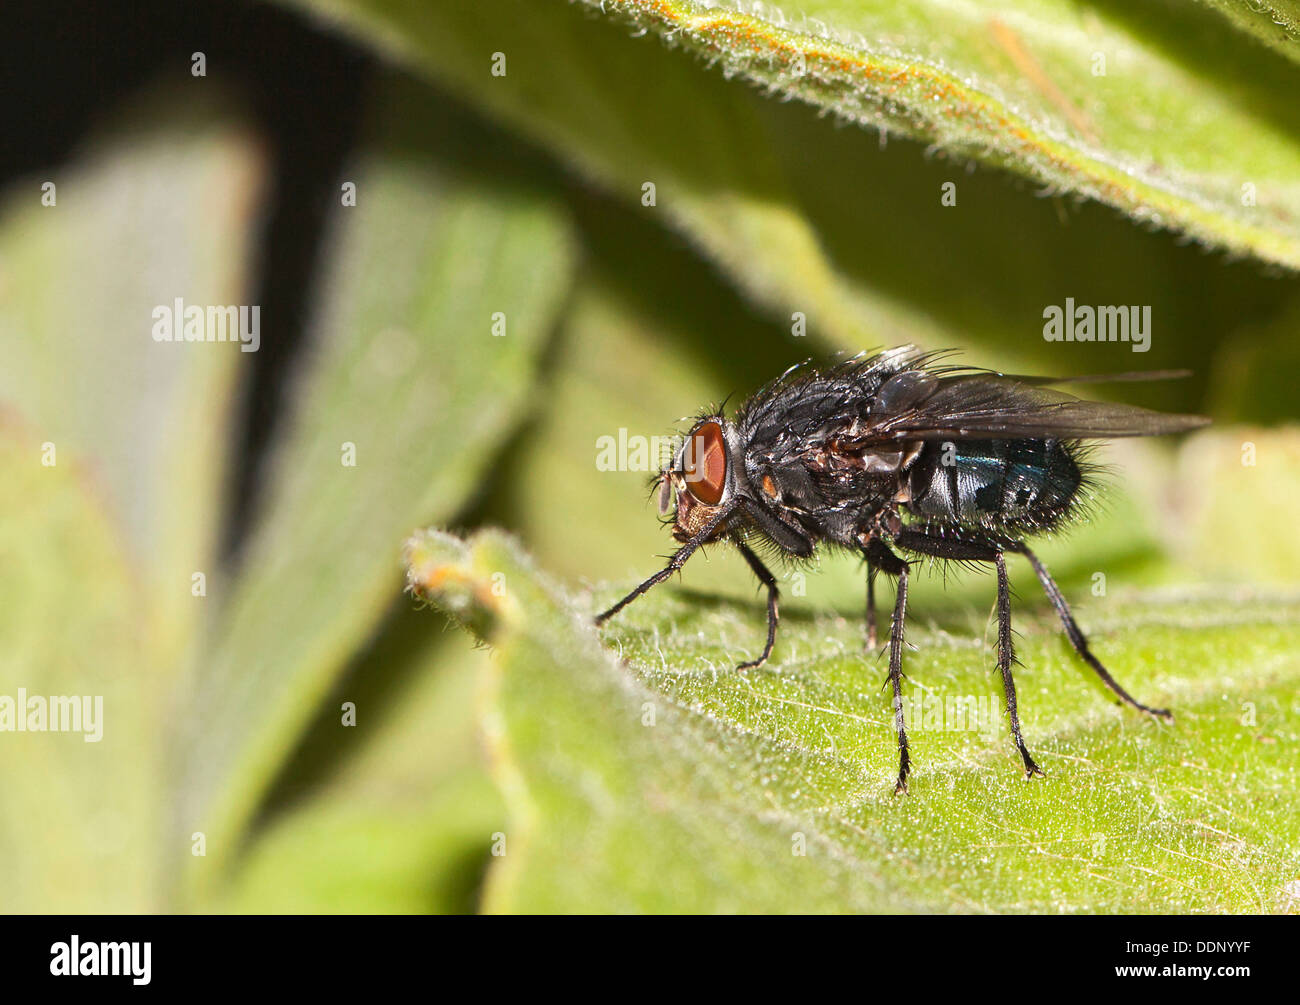 Blow-fly, carrion fly (Calliphoridae) Stock Photo